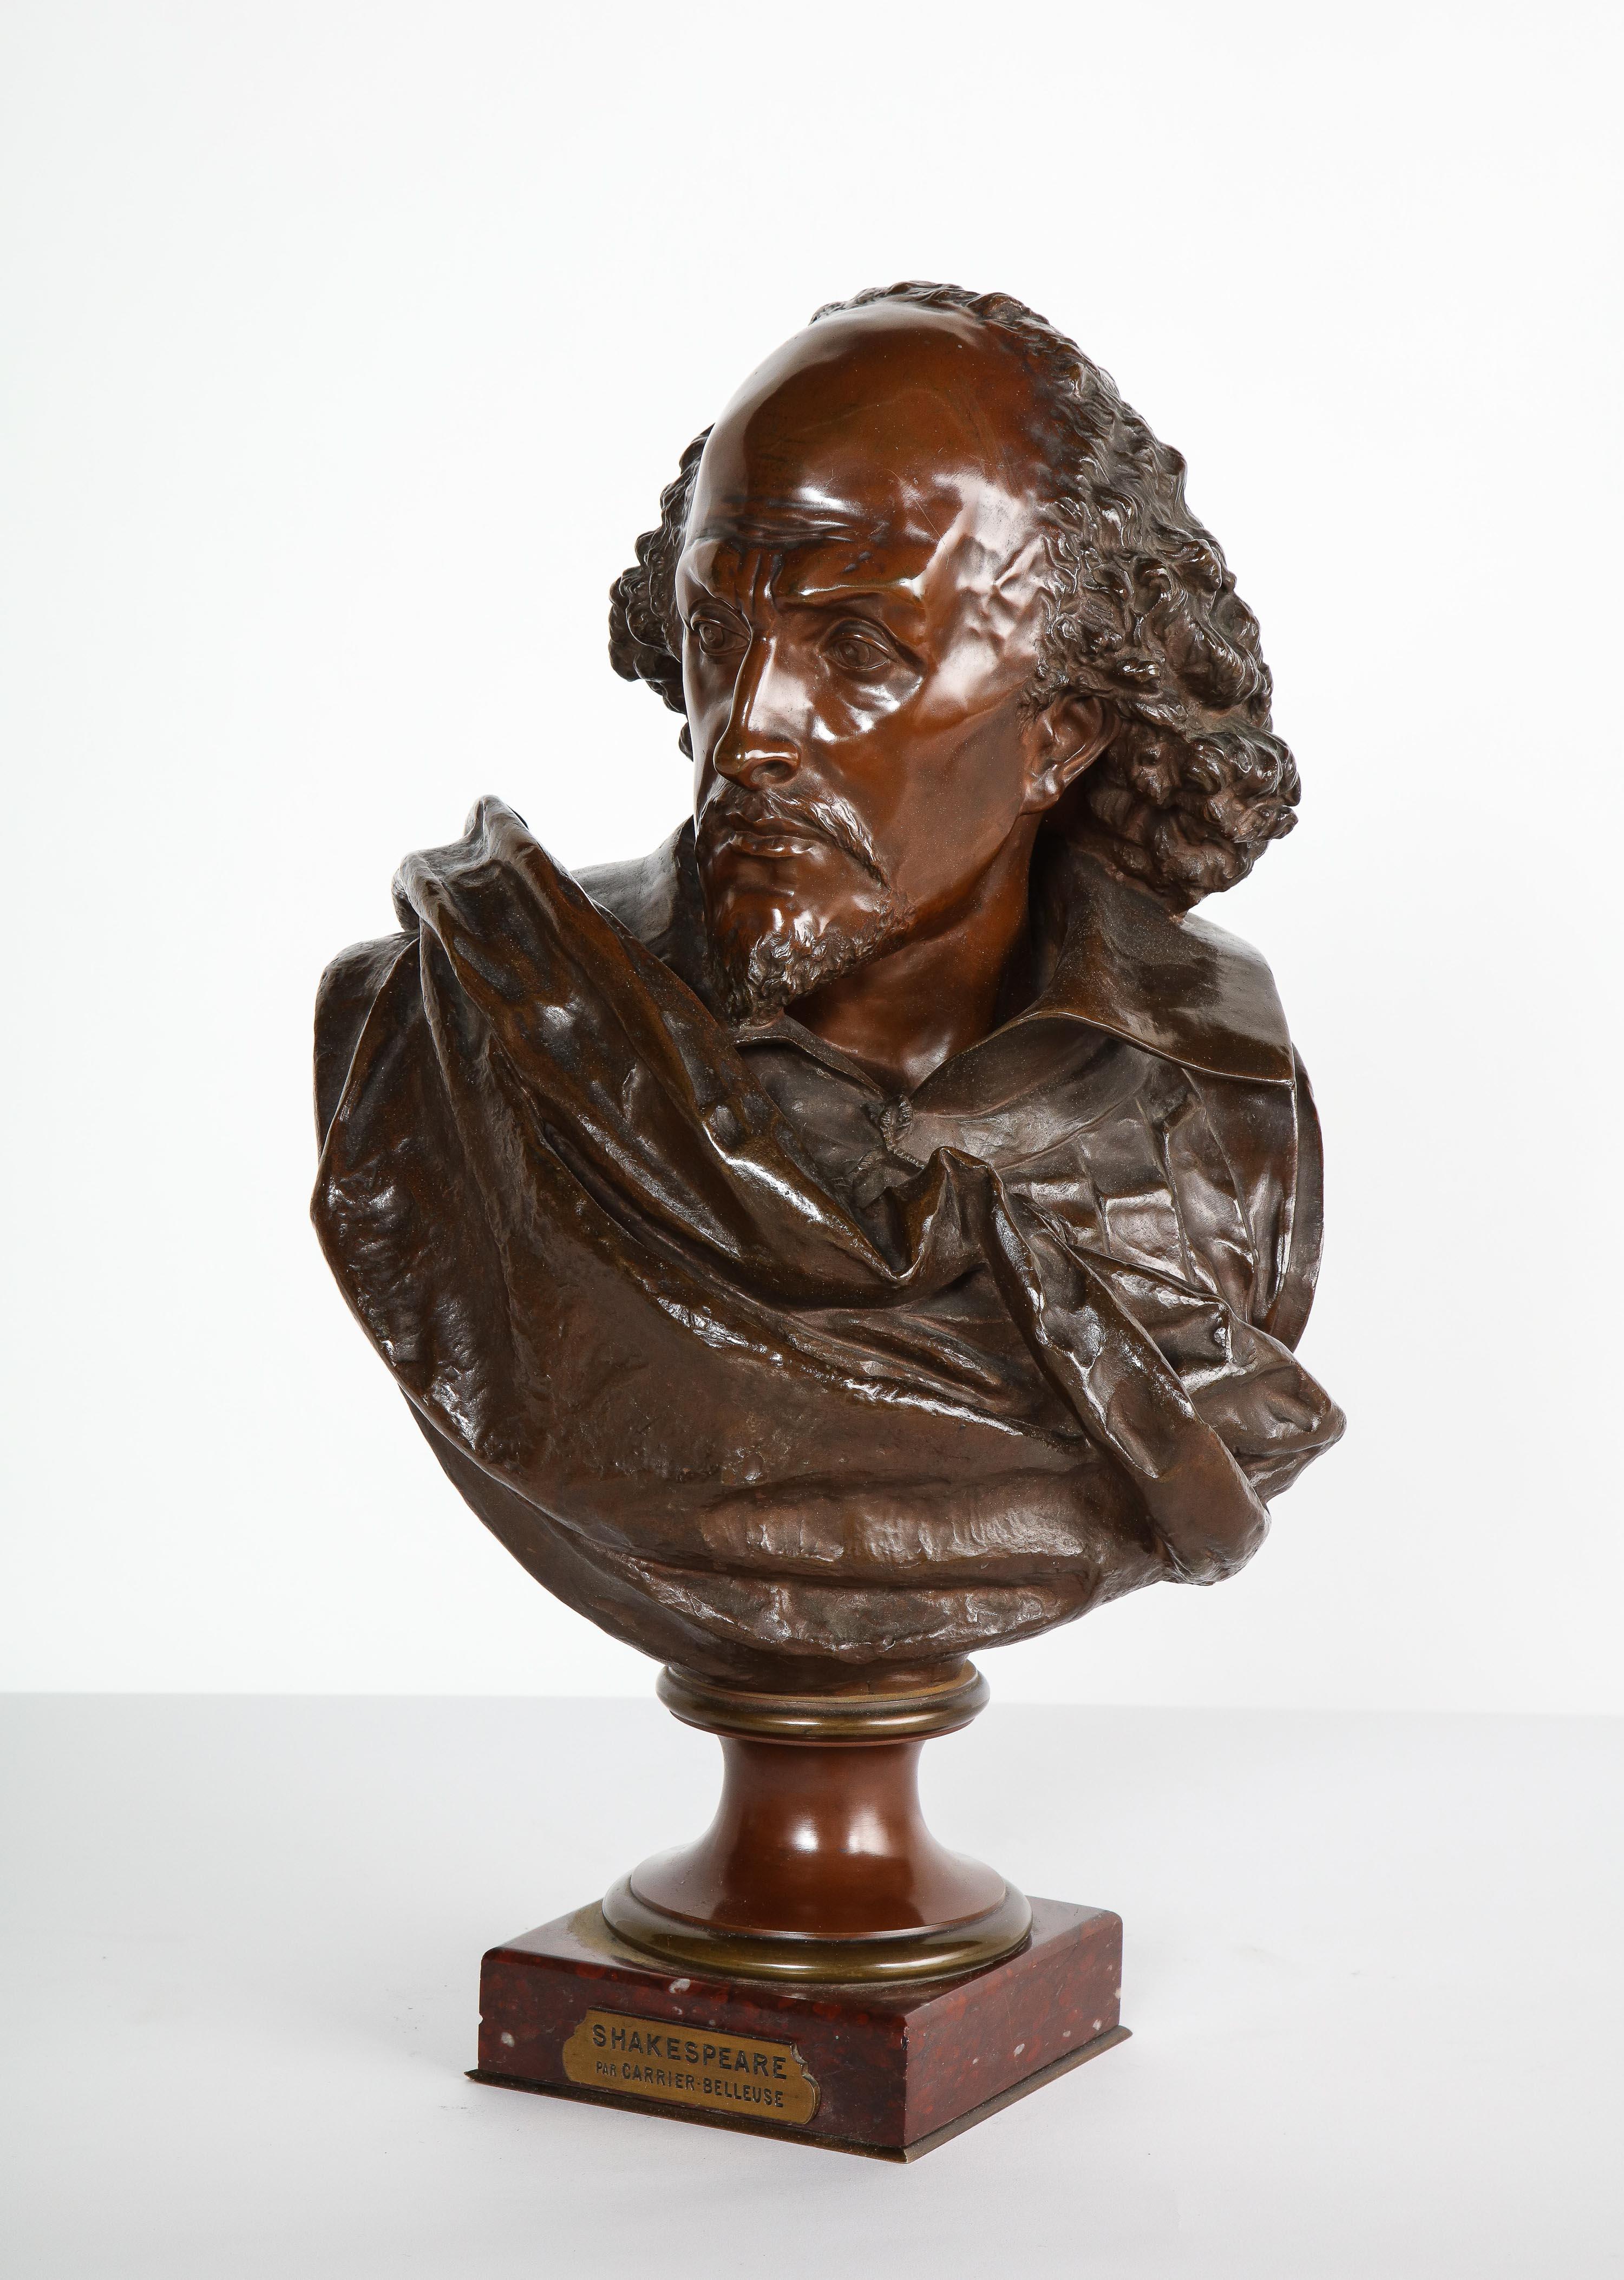 Rare French bronze bust of William Shakespeare by Carrier Belleuse and Pinedo, circa 1870.

Signed - A. Carrier-Belleuse Paris and inscribed PINEDO fondeur, on a red marble base.

Measures: 22